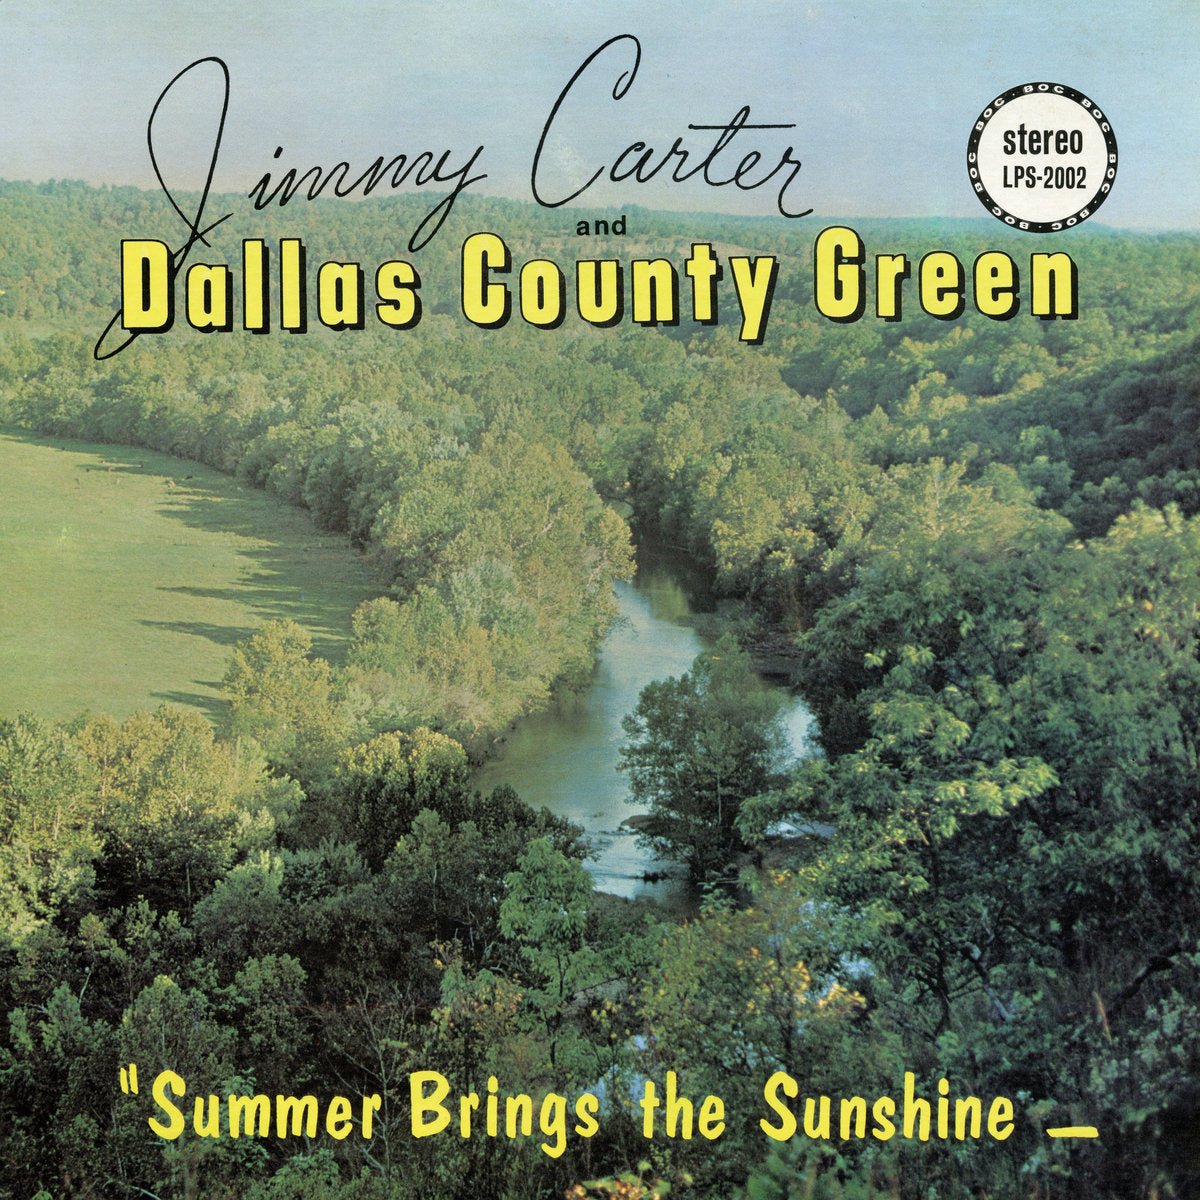 Jimmy Carter and Dallas County Green - Summer Brings the Sunshine (Vinyl LP)